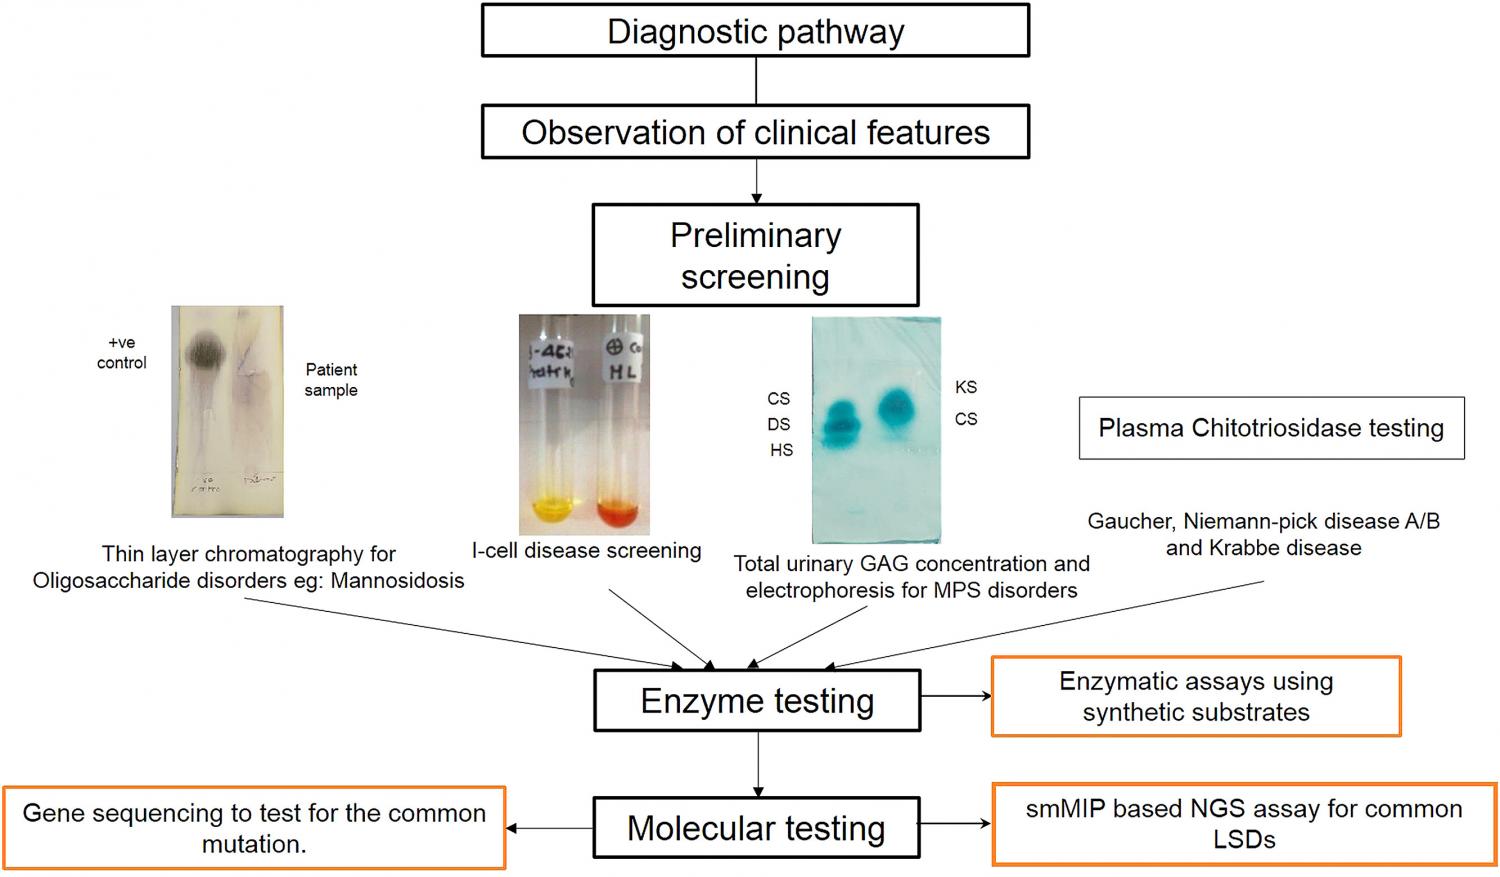 Shows the pathway from Diagnostic pathway through Preliminary screening to Enzyme and Molecular Testing